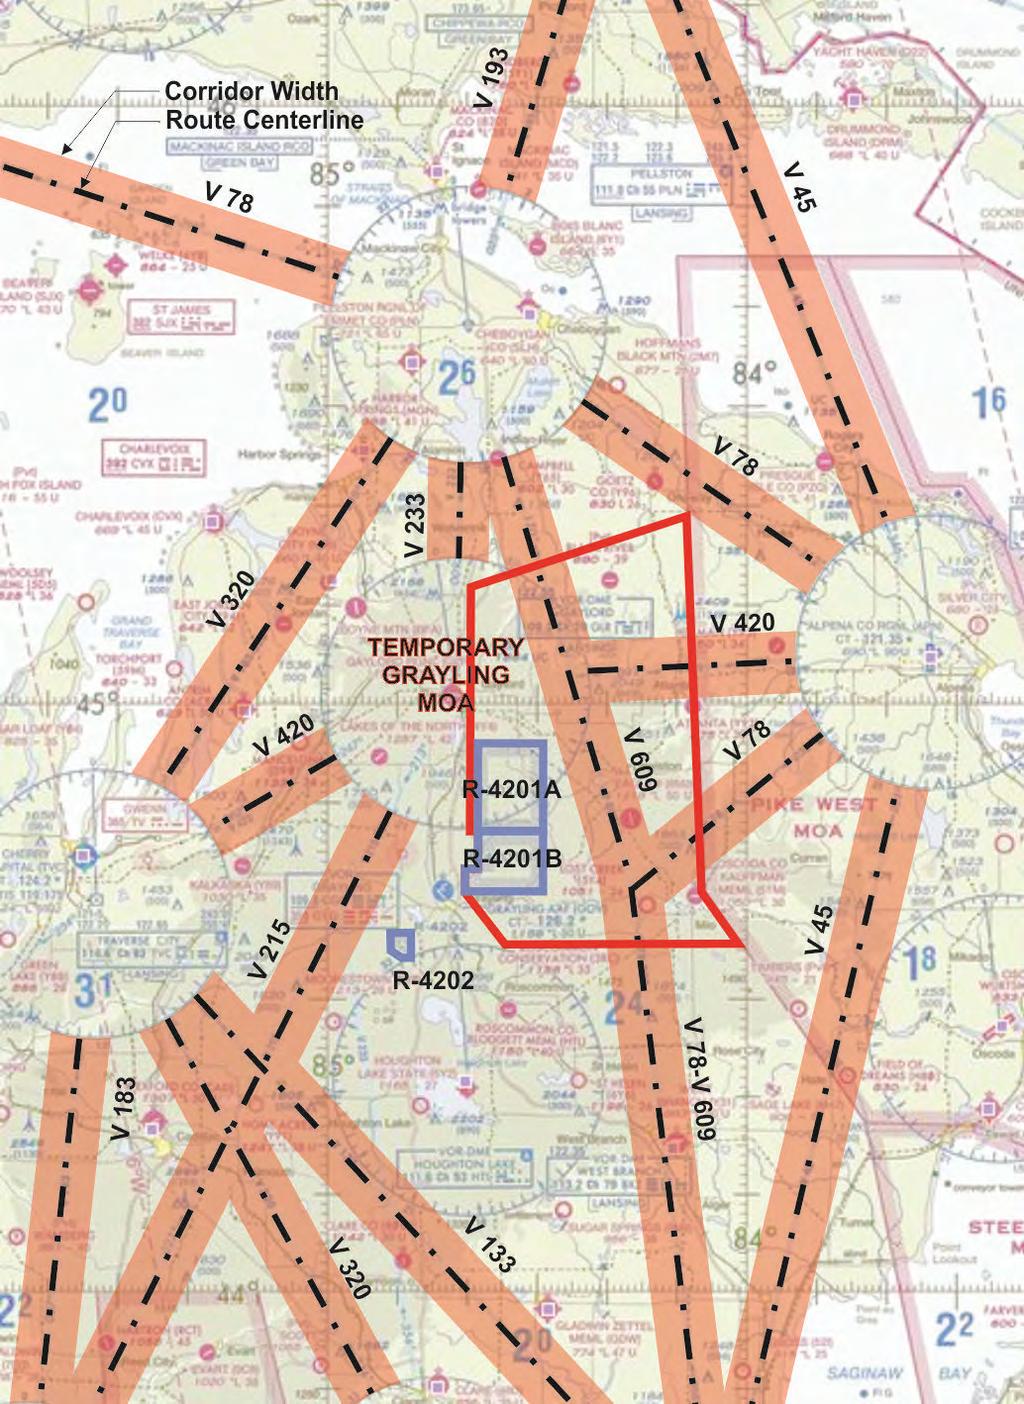 when the Grayling Temporary MOA would be activated, and much lower usage other times of the year. Sources: FAA 2015b. Figure 3-4. Federal Air Corridors V-215 & V-233.